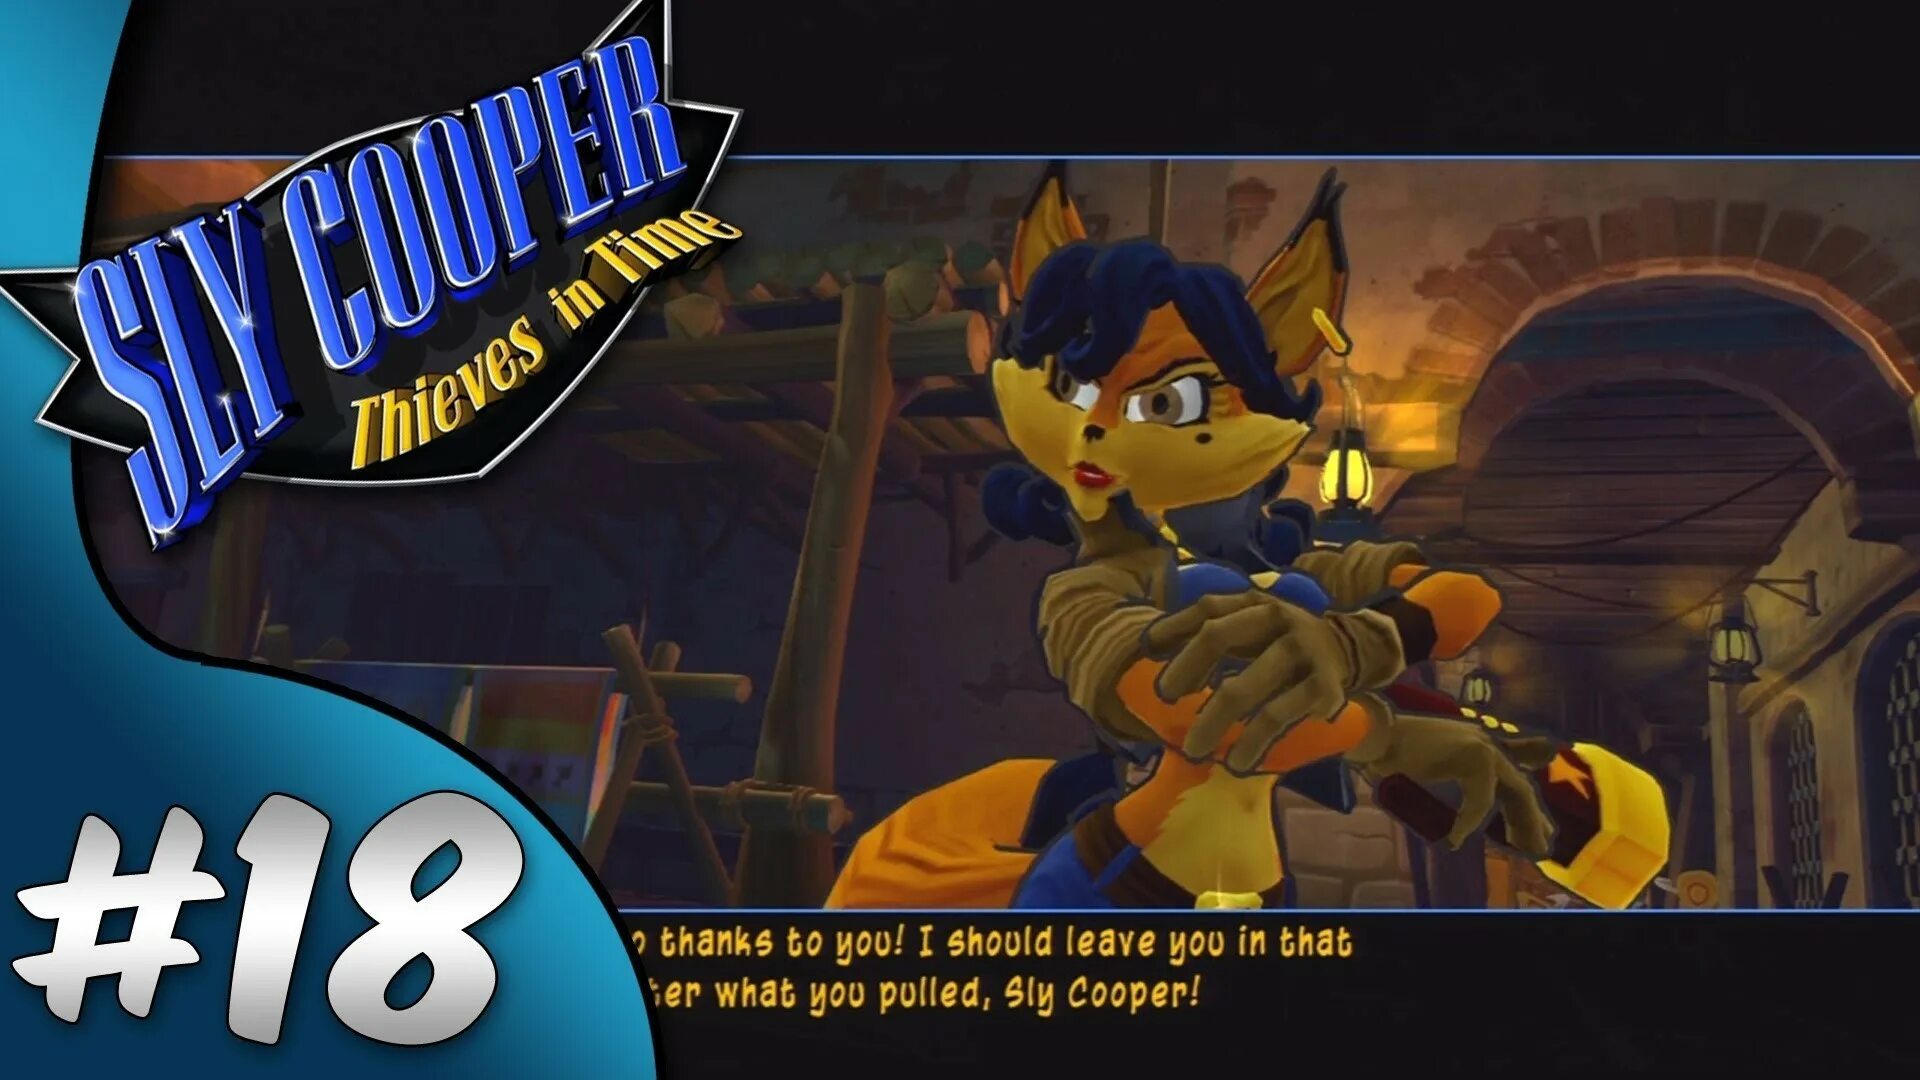 Слай купер прыжок. Sly Cooper Thieves in time Кармелита Фокс. Sly Cooper: прыжок во времени. Слай Купер прыжок во времени персонажи. Слай Купер прыжок во времени Кармелита.